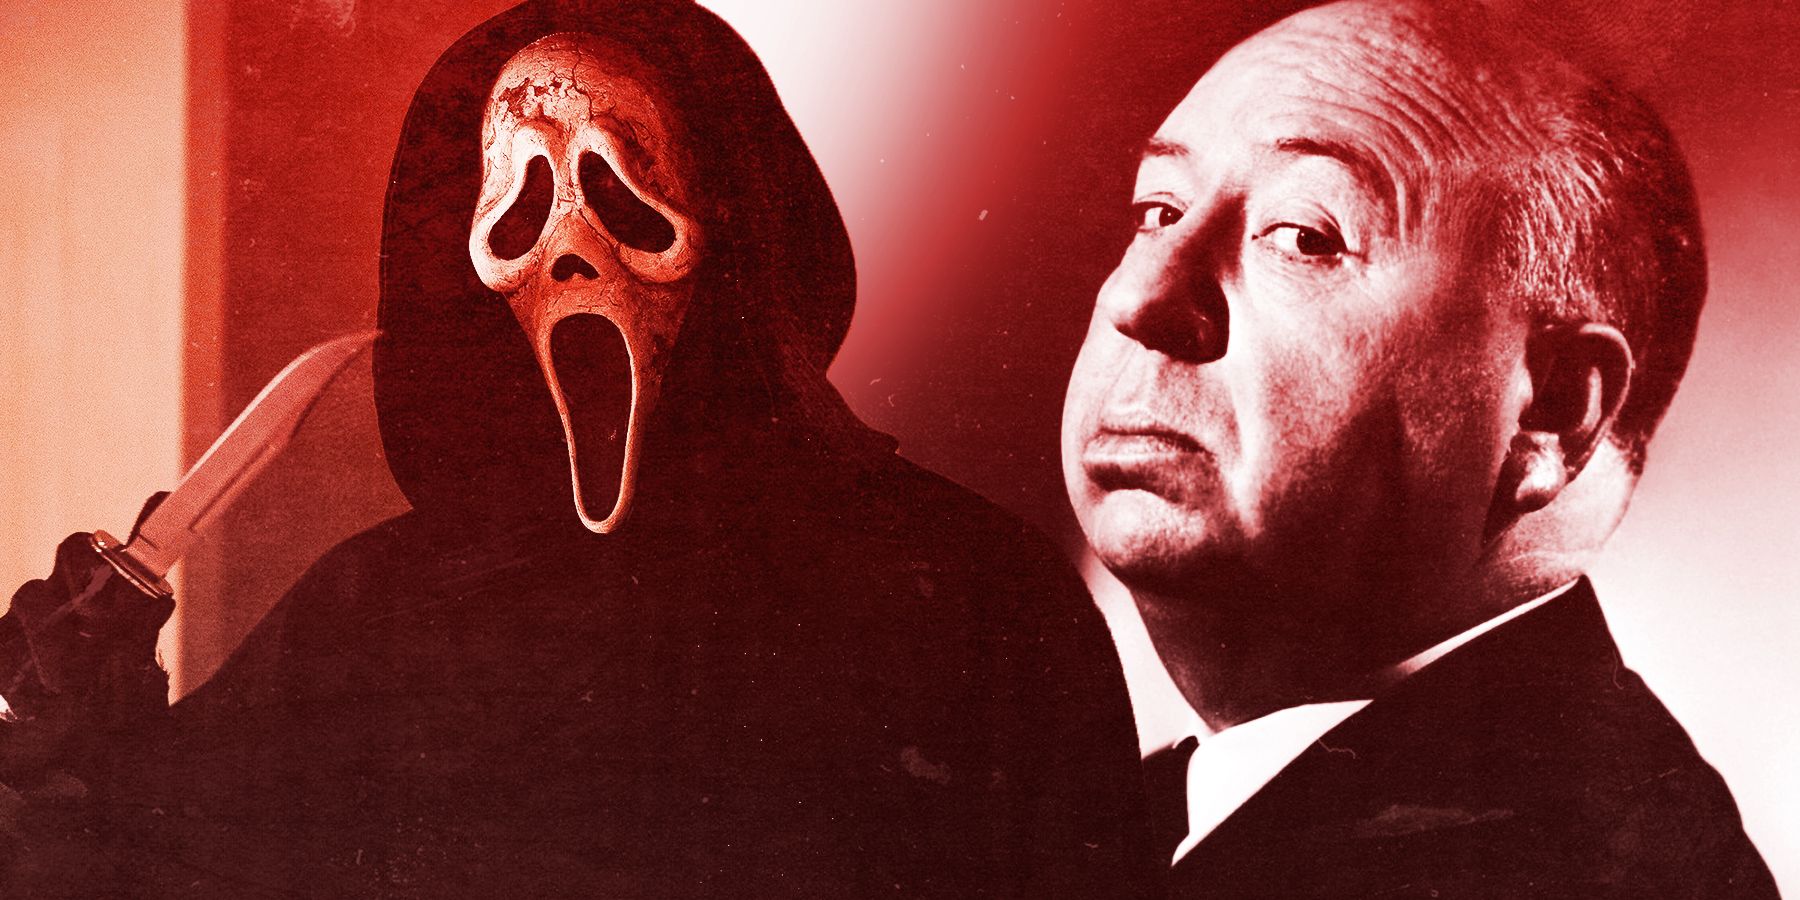 The Next Scream Will Have To Follow Hitchcock To Top Itself